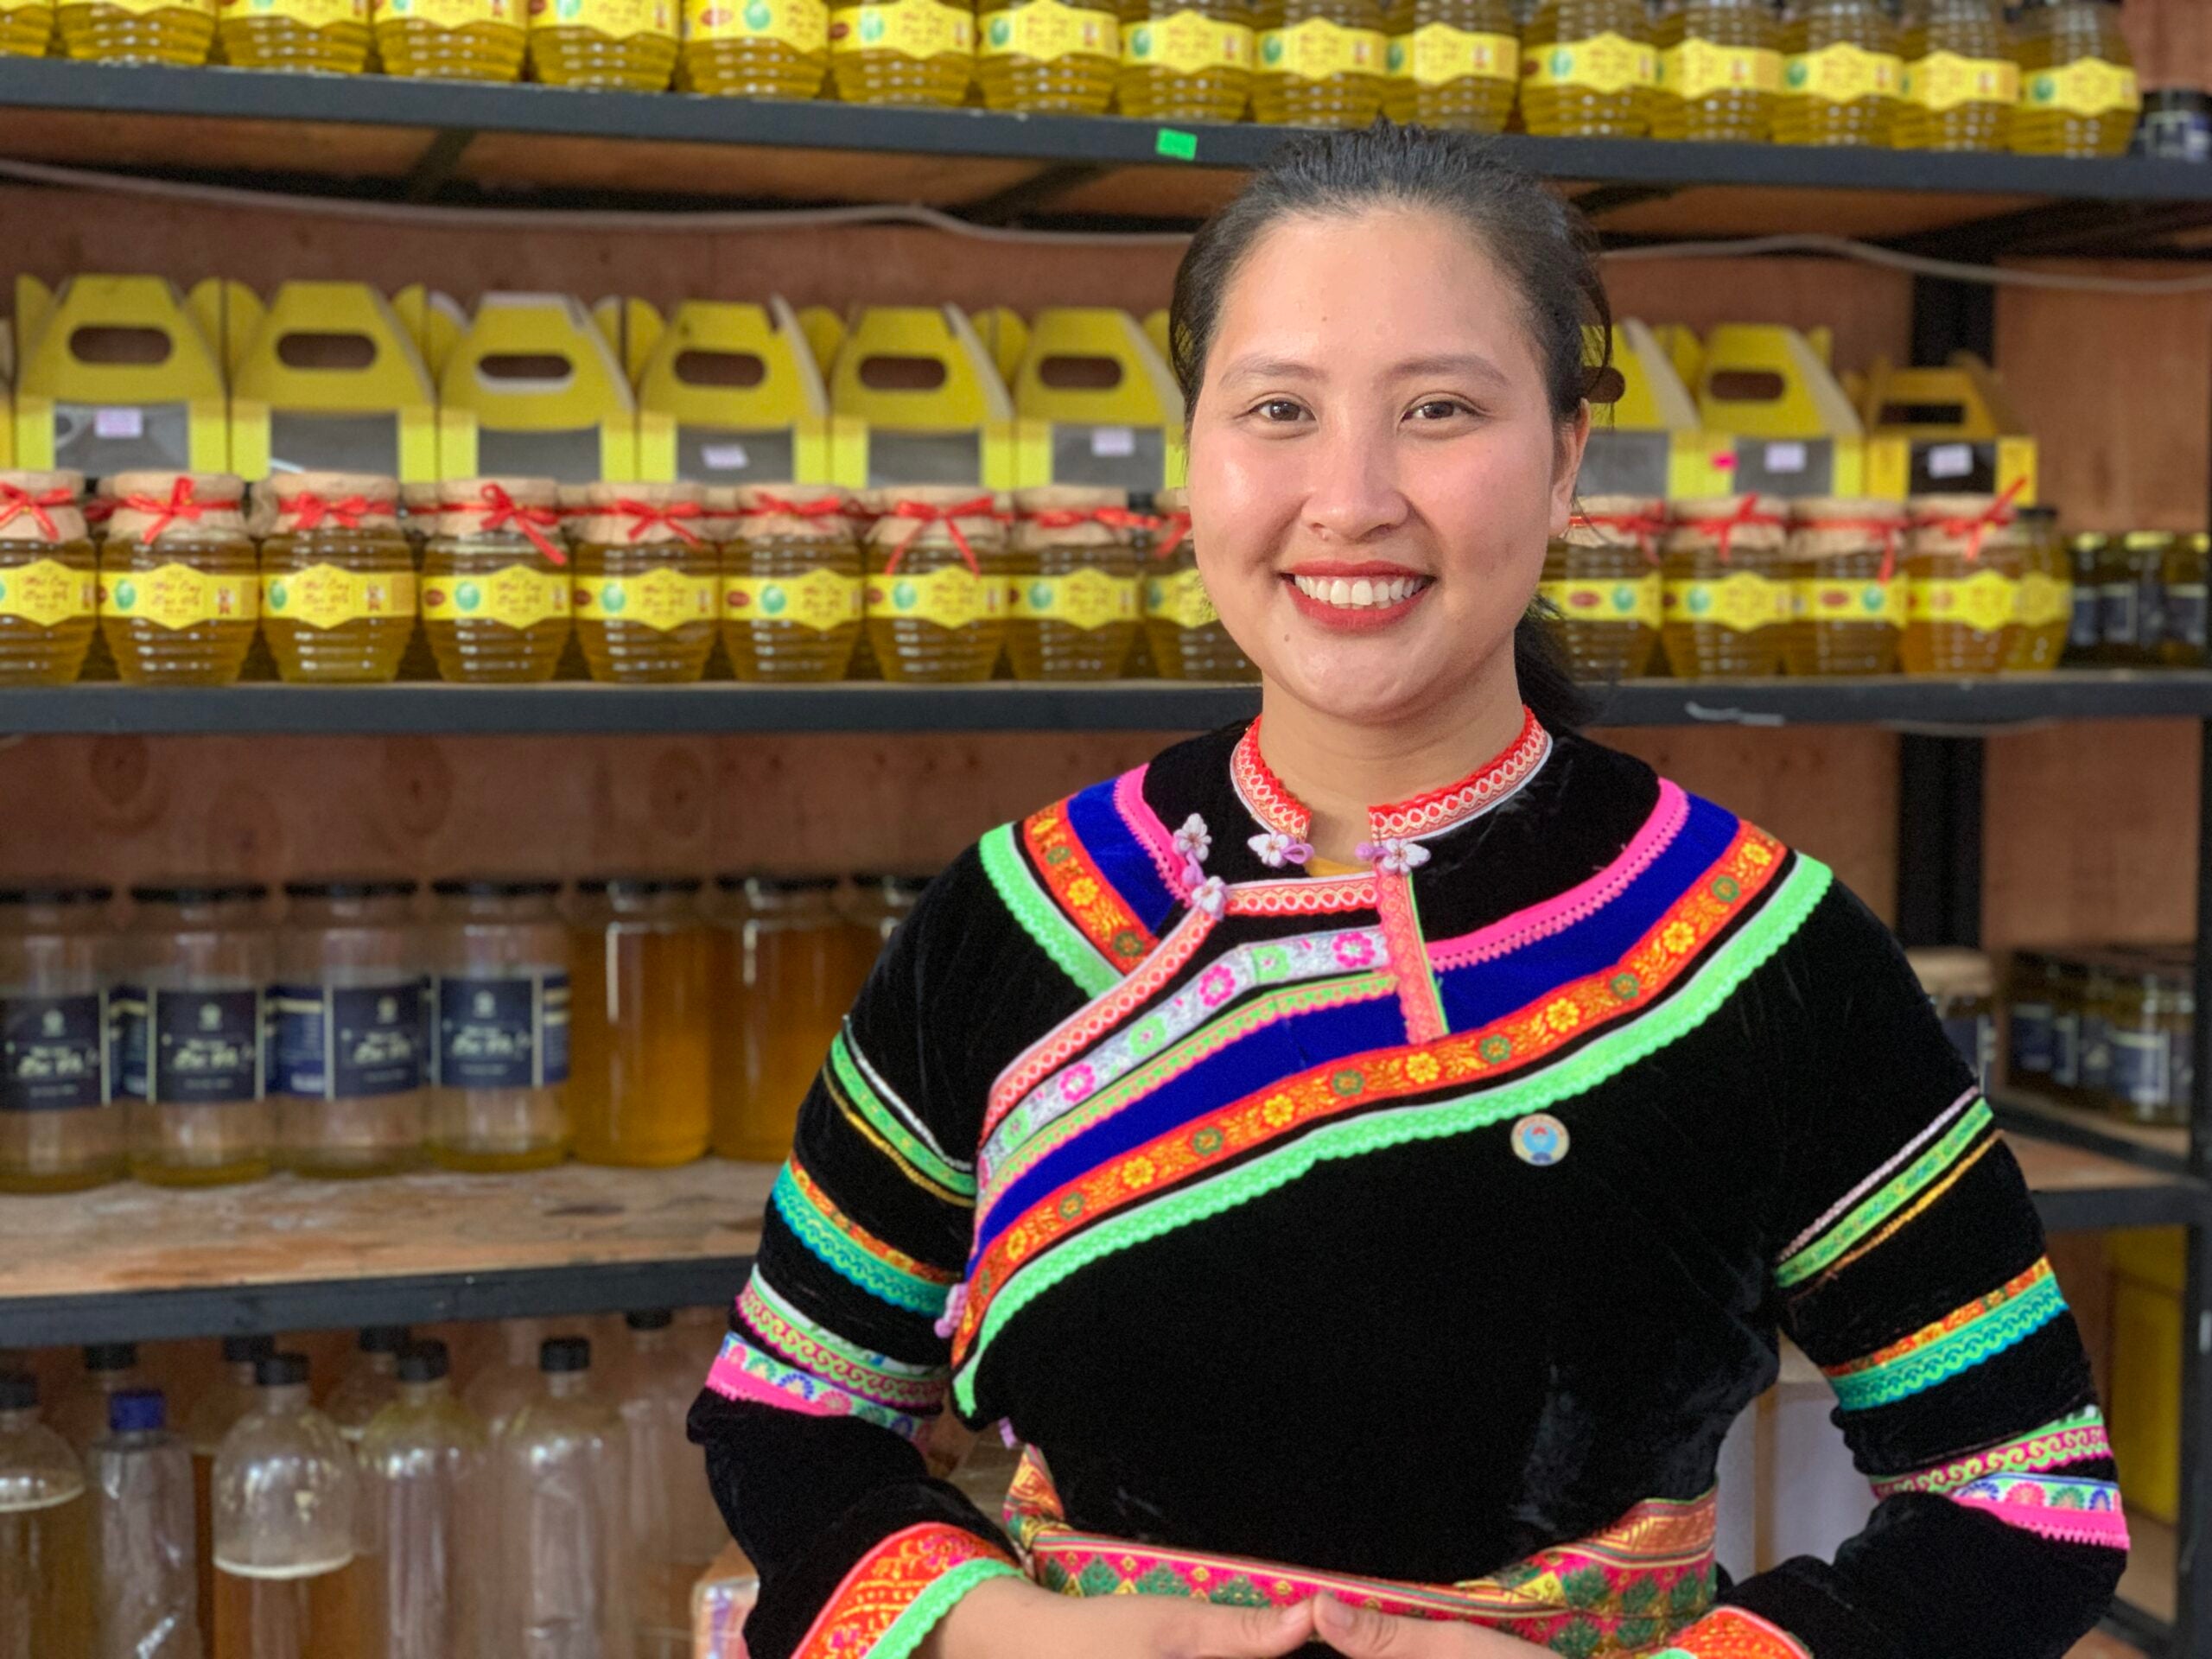 A Viet woman wearing a black shirt with colorful neon stripes stands in front of a fully stocked store shelf